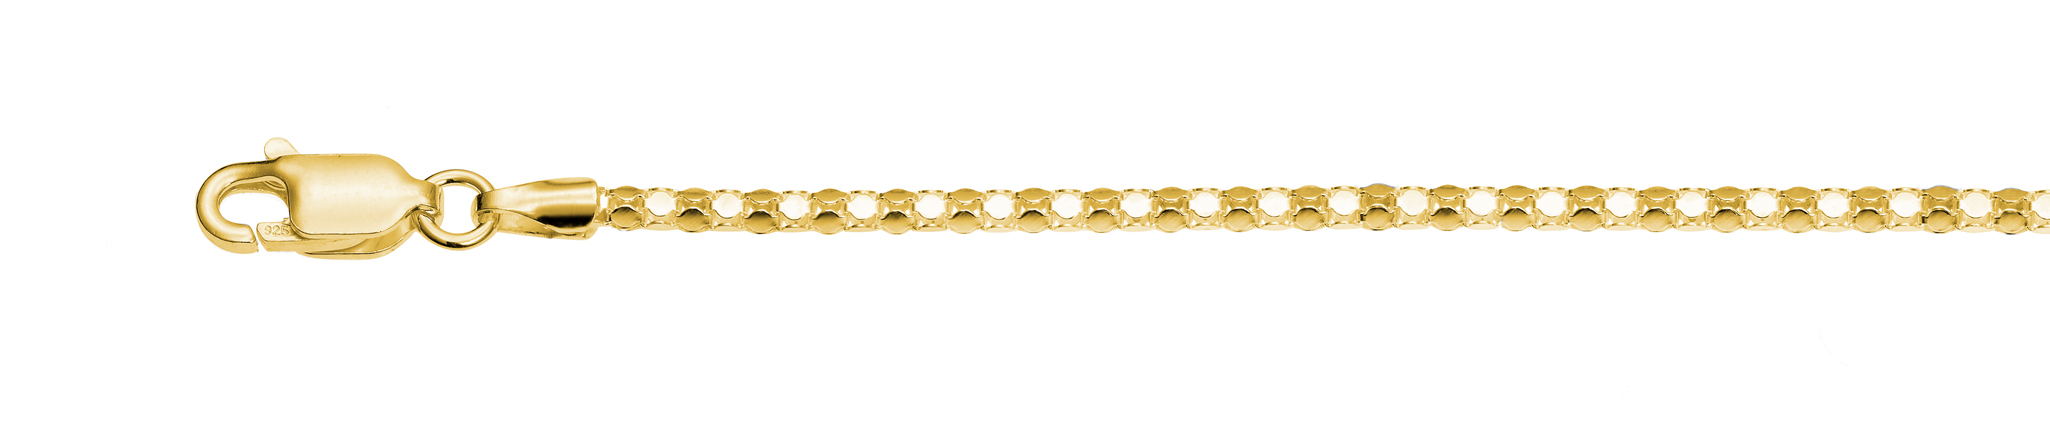 Ref.: 91418 - Flat popcorn gold plated - Wide 1.8